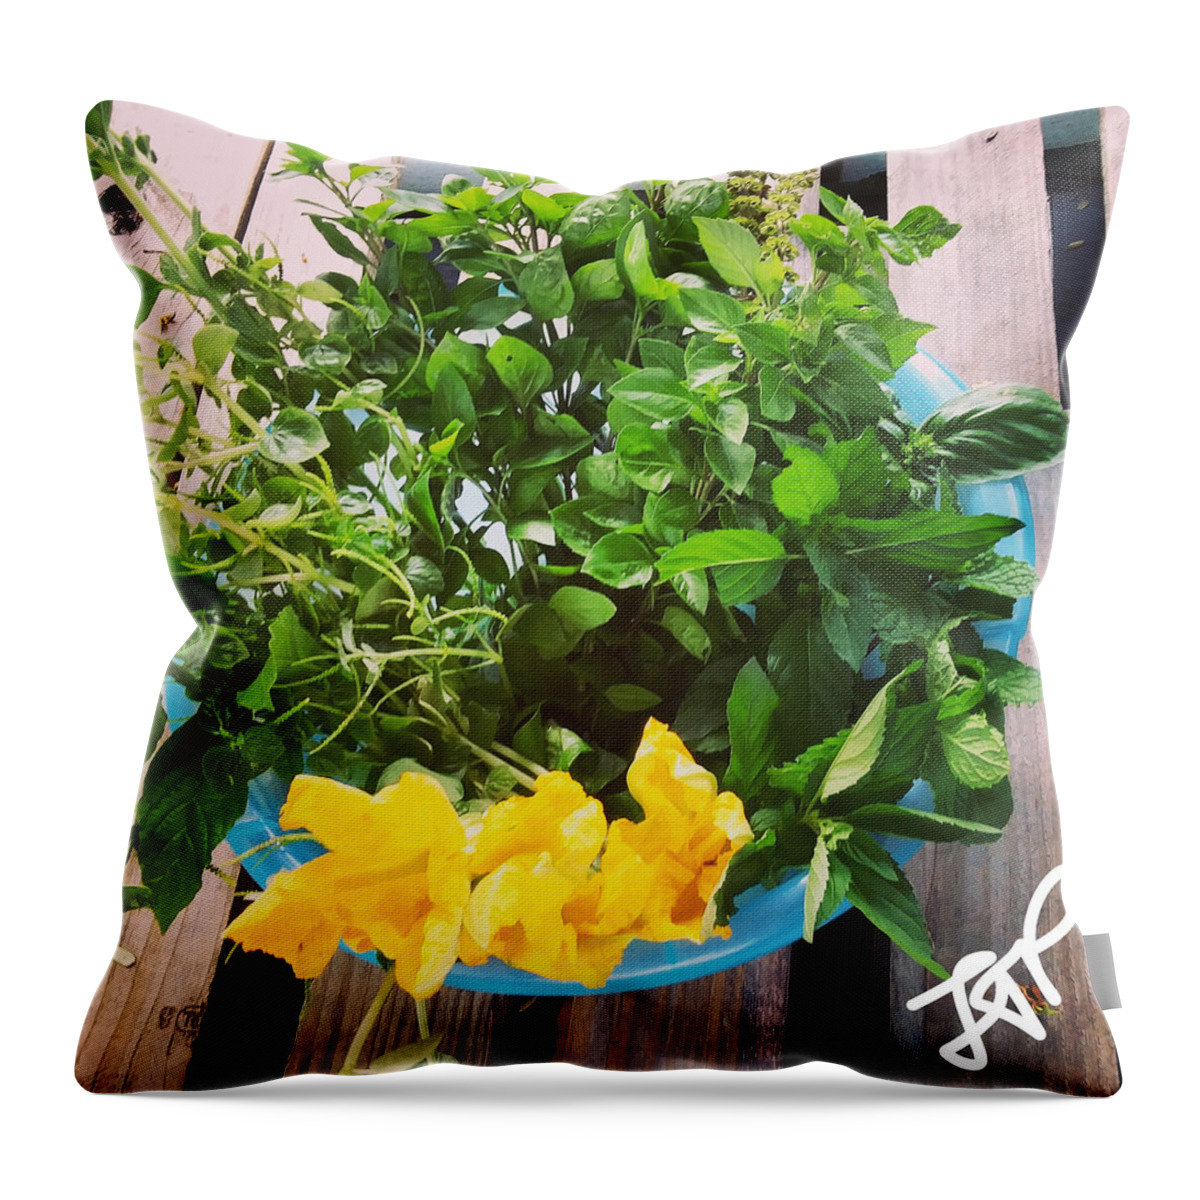 Food Throw Pillow featuring the photograph Heal With Food by Esoteric Gardens KN